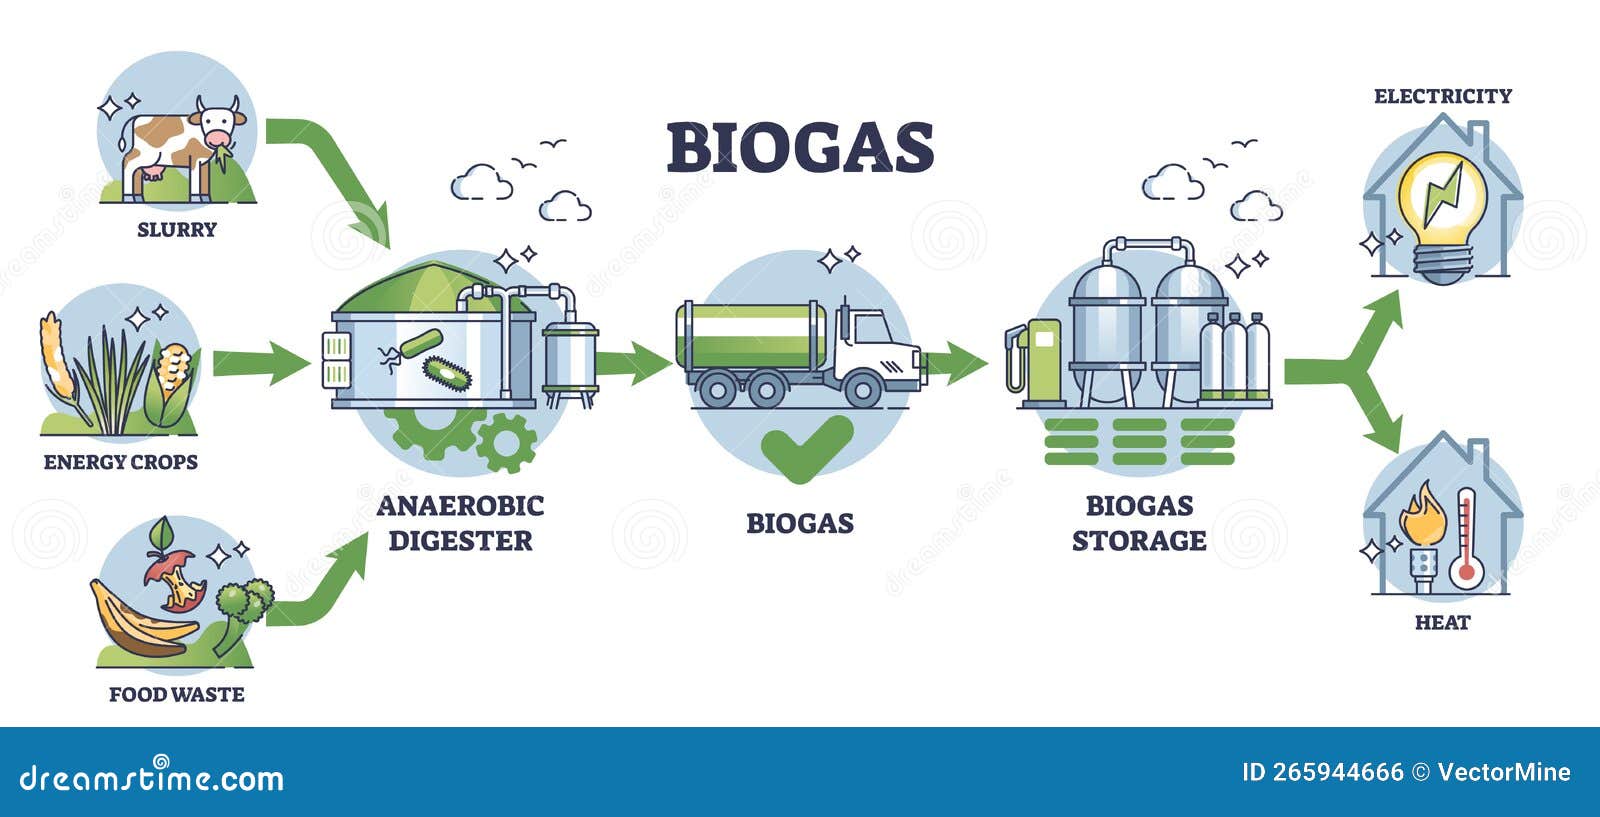 thesis on biogas production